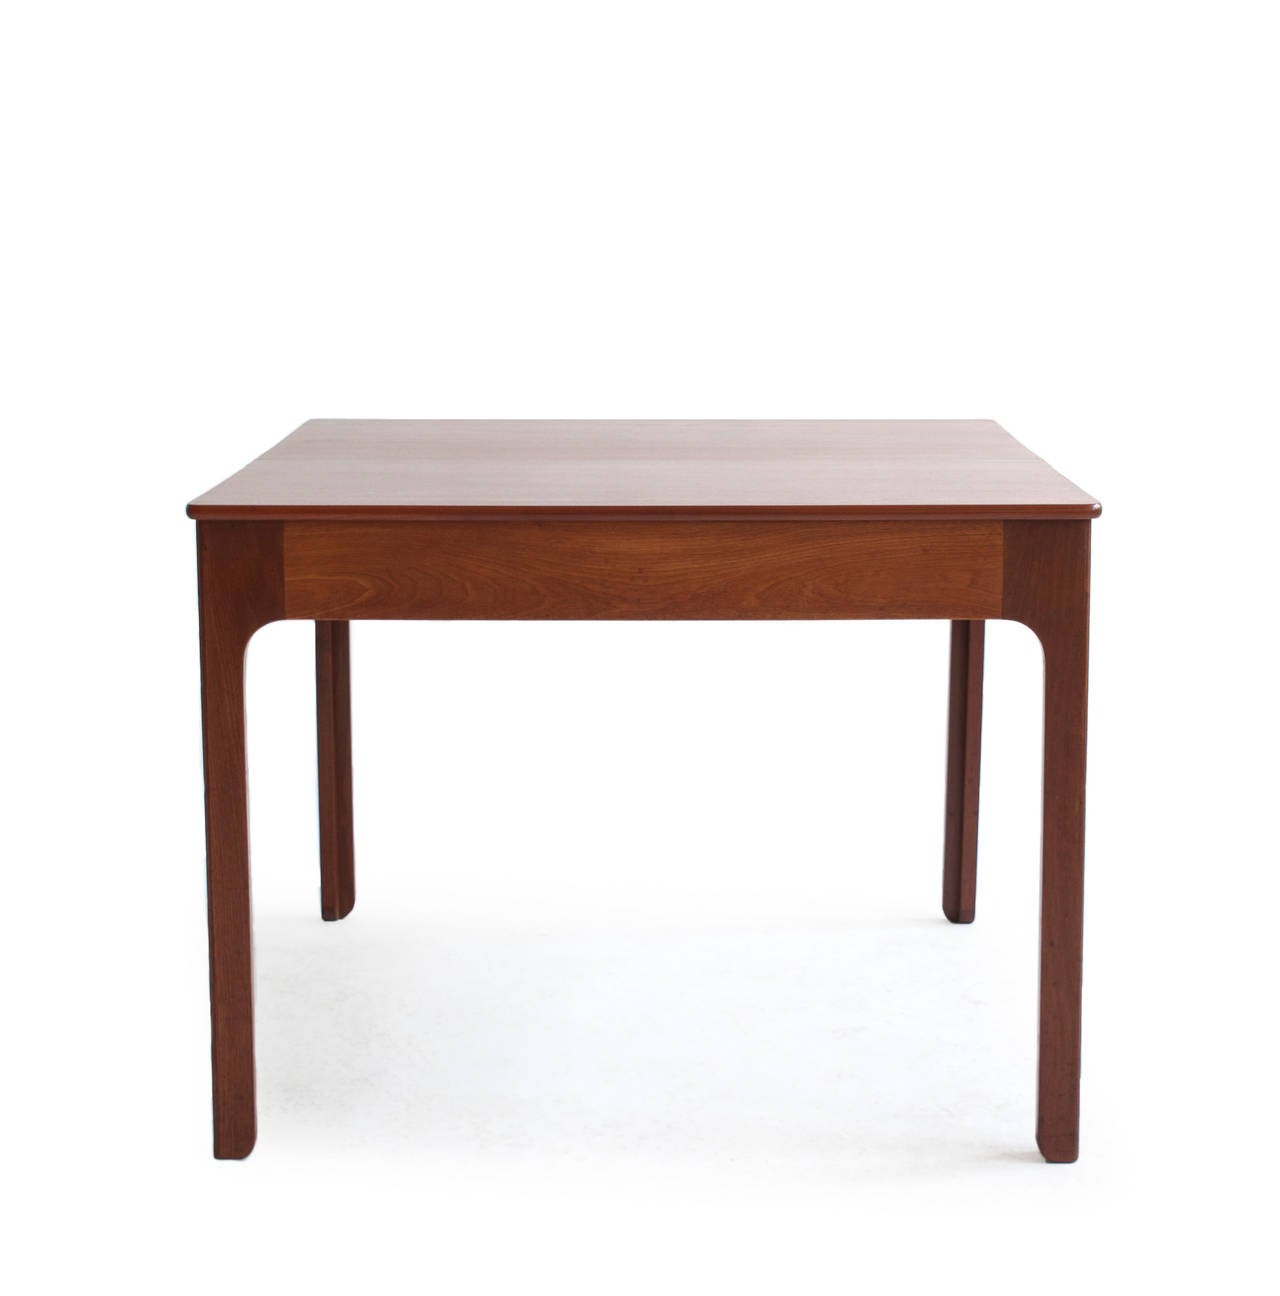 Kaare Klint Cuban mahogany games or small dining table. 

Foldable top and adjustable frame of solid Cuban mahogany, hidden tray for smaller storage. 

Designed by Kaare Klint 1934, executed by cabinetmaker Rud Rasmussen, Denmark mid-1930s,